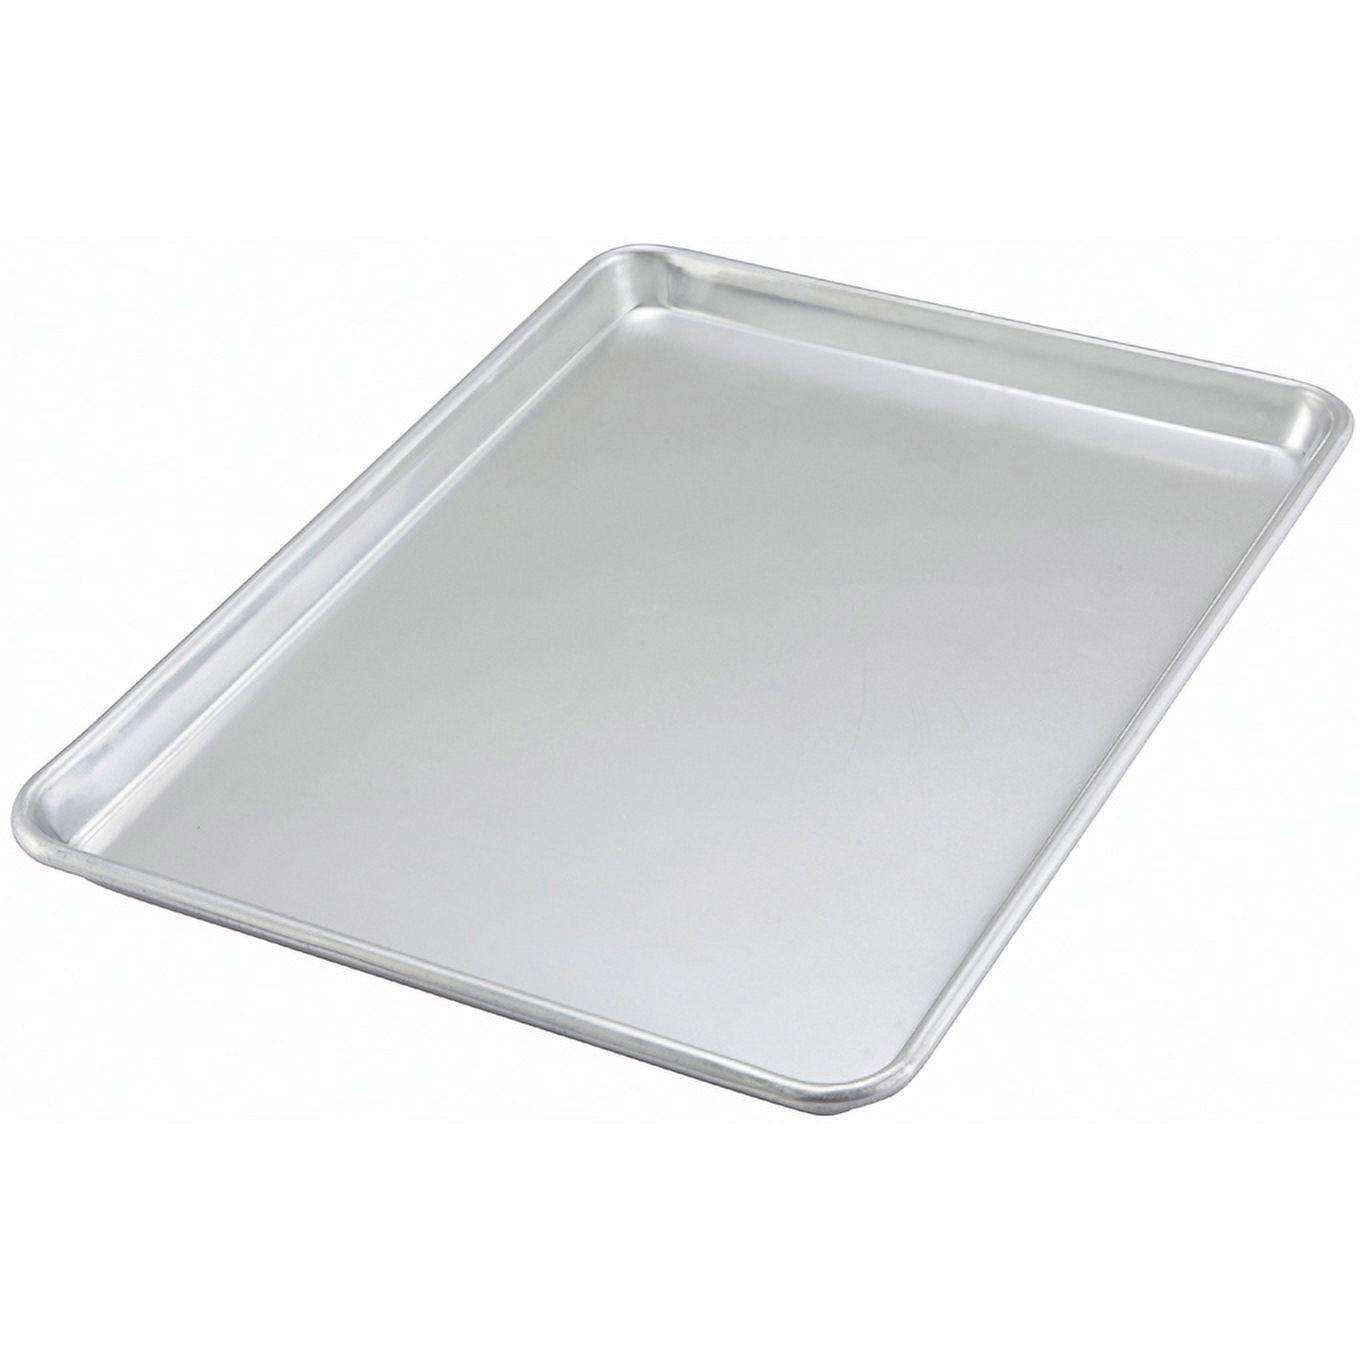 M.v. Trading Commercial Grade Half Size Aluminum Baking Sheet Pan with 2 Snap-tight Plastic Lid Covers, 13 x 18, Set of 2, NSF Approved